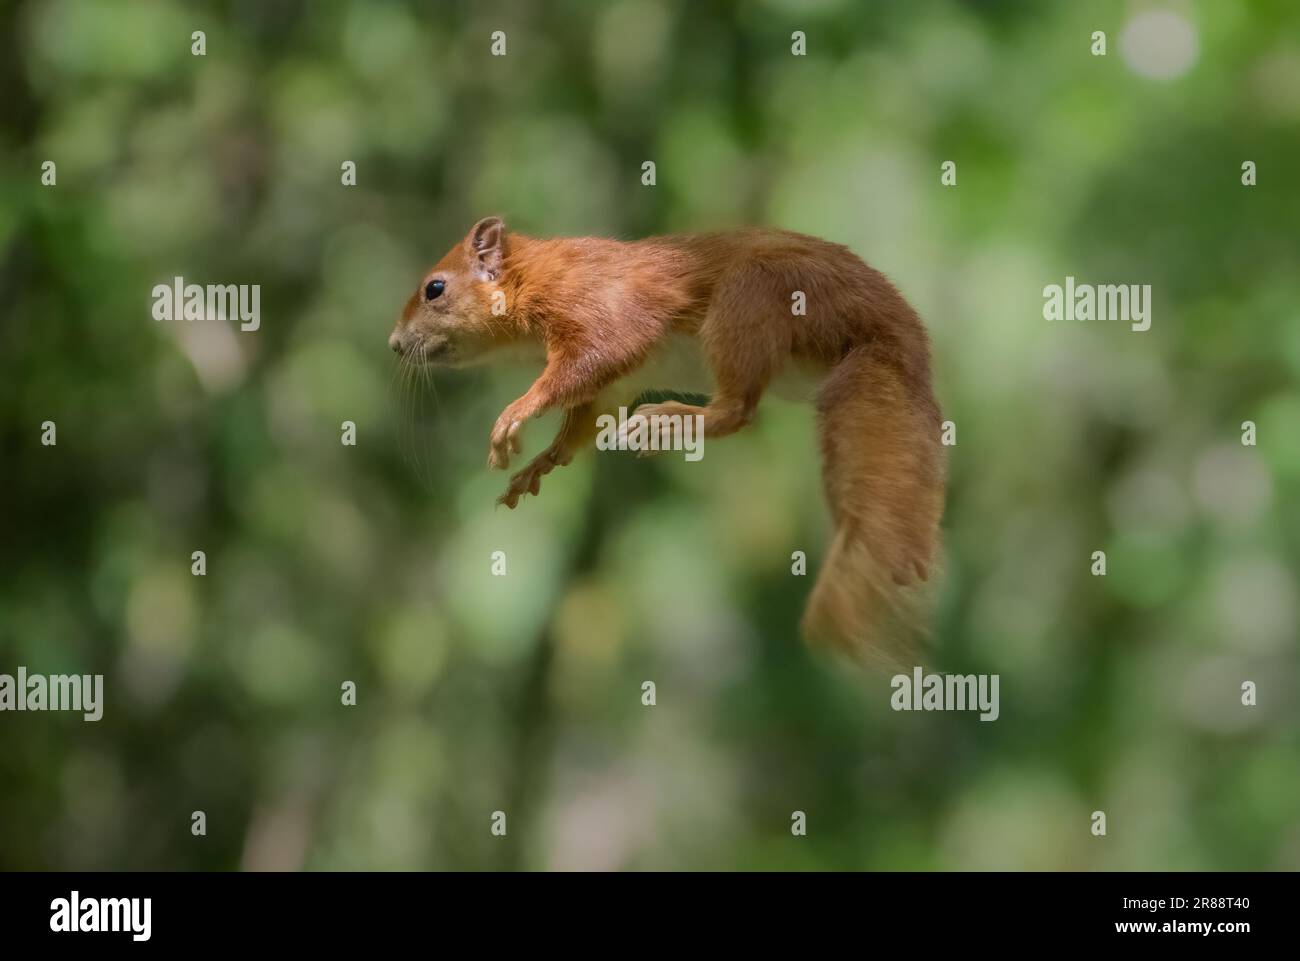 The red squirrel has remarkable skills. DOUNE; SCOTLAND: FUNNY images show acrobatic red squirrels appearing to fly like Superman while chasing each o Stock Photo